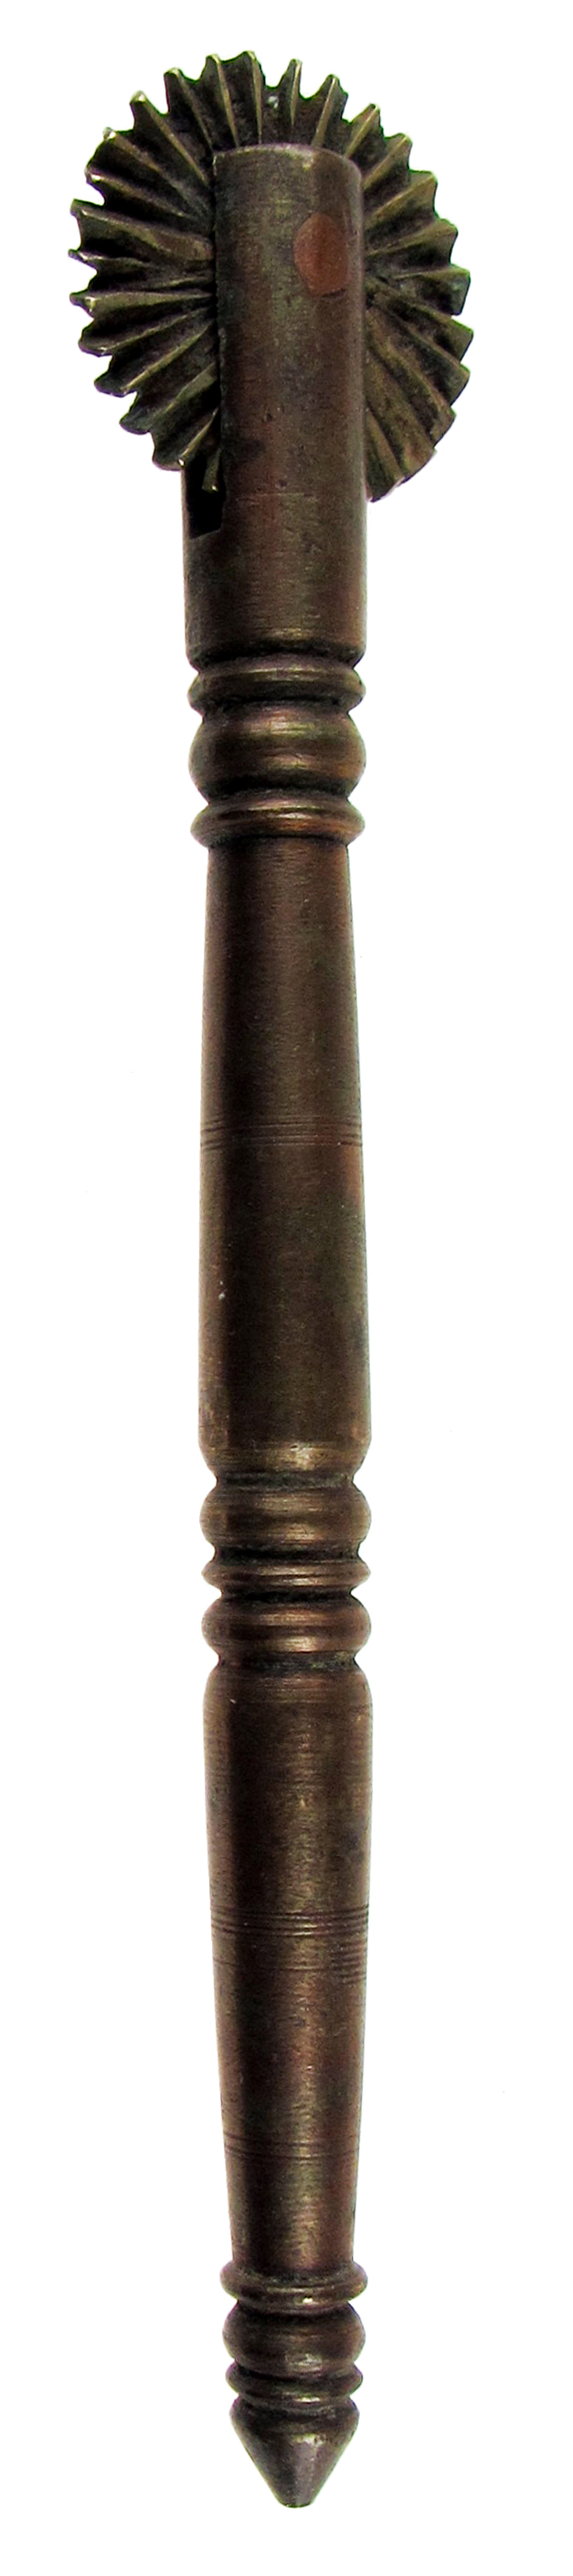 A 19TH CENTURY COPPER-ALLOY PASTRY JIGGER  with wheel and cast turned handle, Indian Raj, 15.5cm